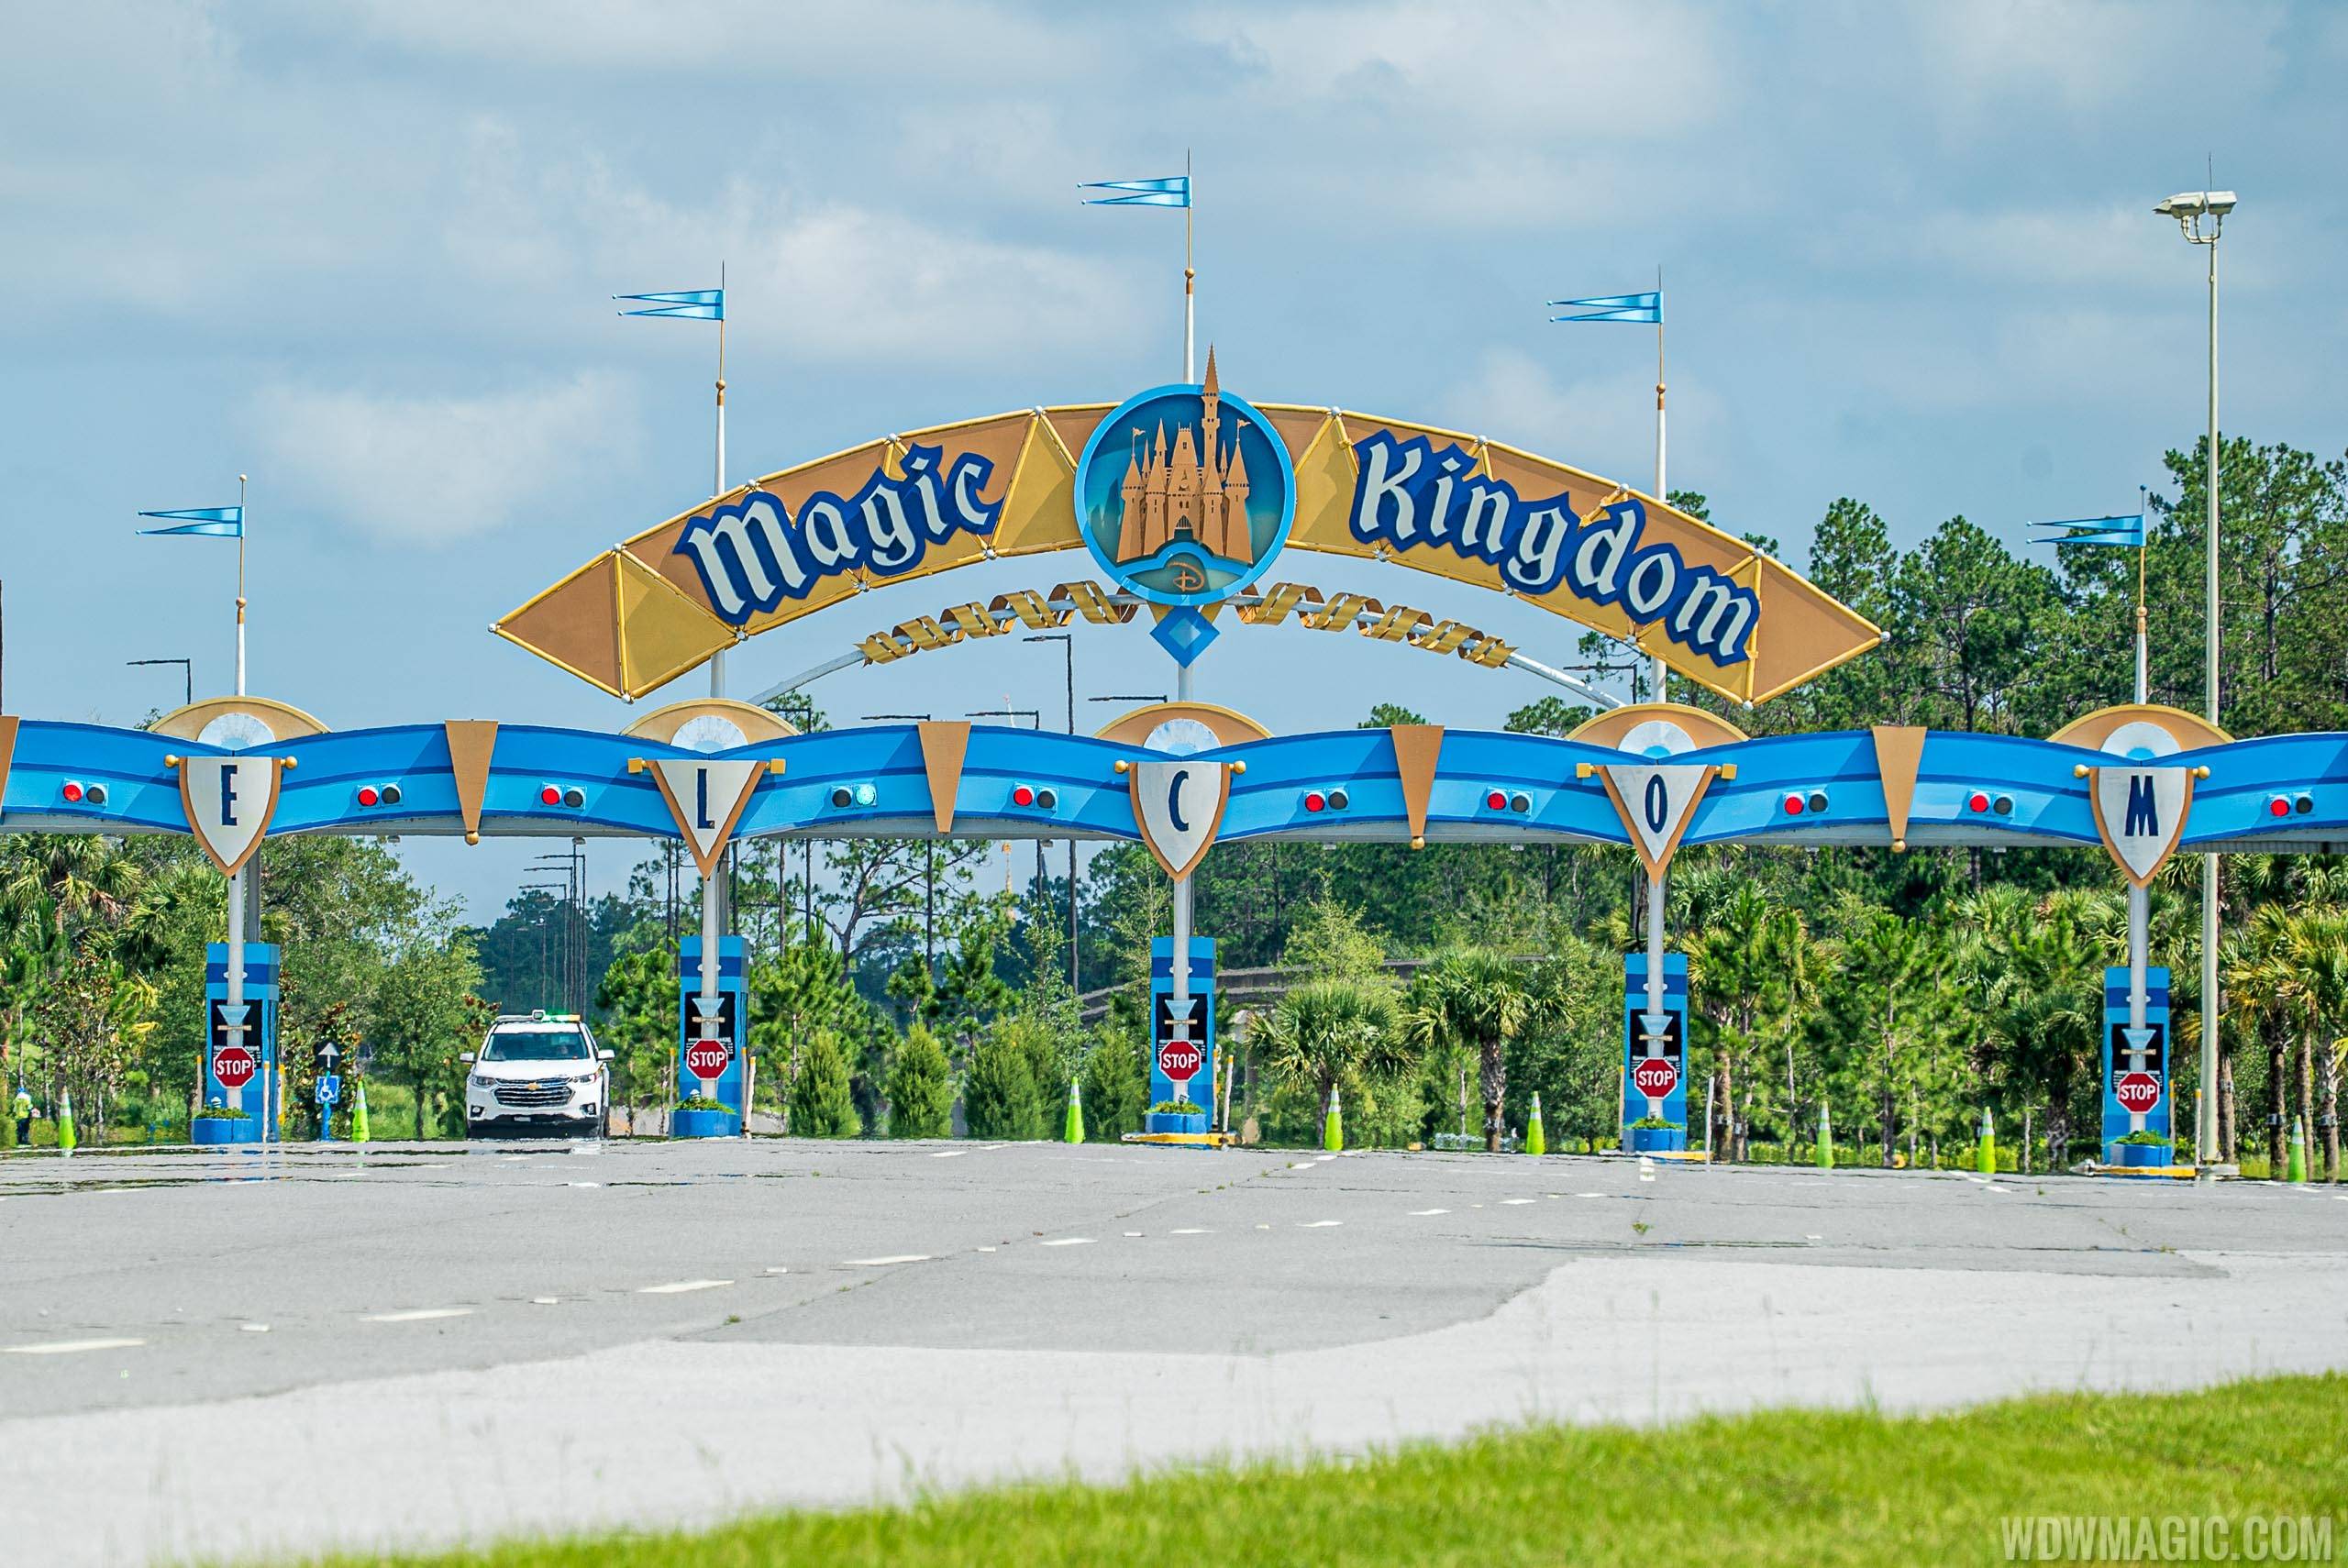 Magic Kingdom remains on course to reopen on July 11 despite rising COVID-19 cases in Florida